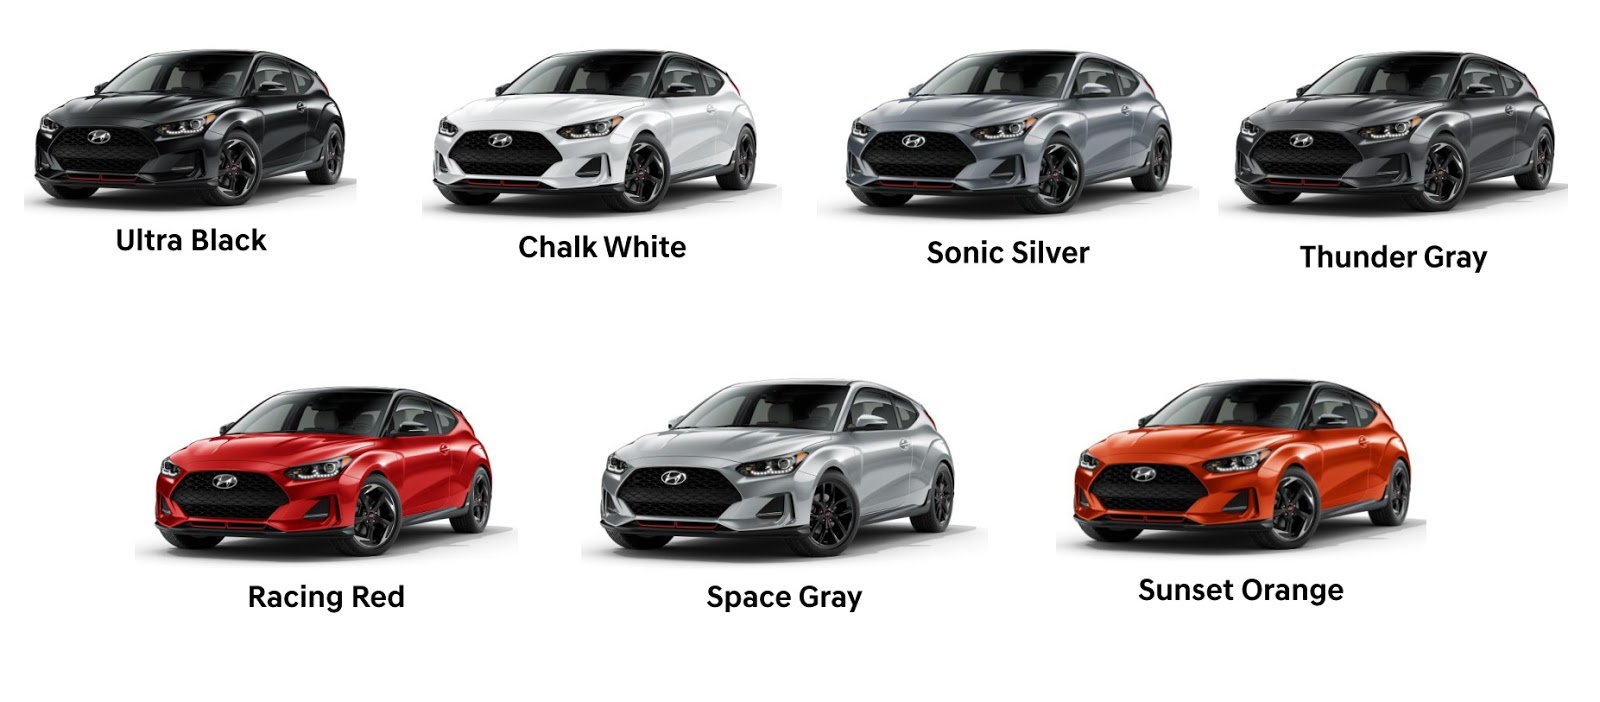 First Drive: The New Hyundai Veloster